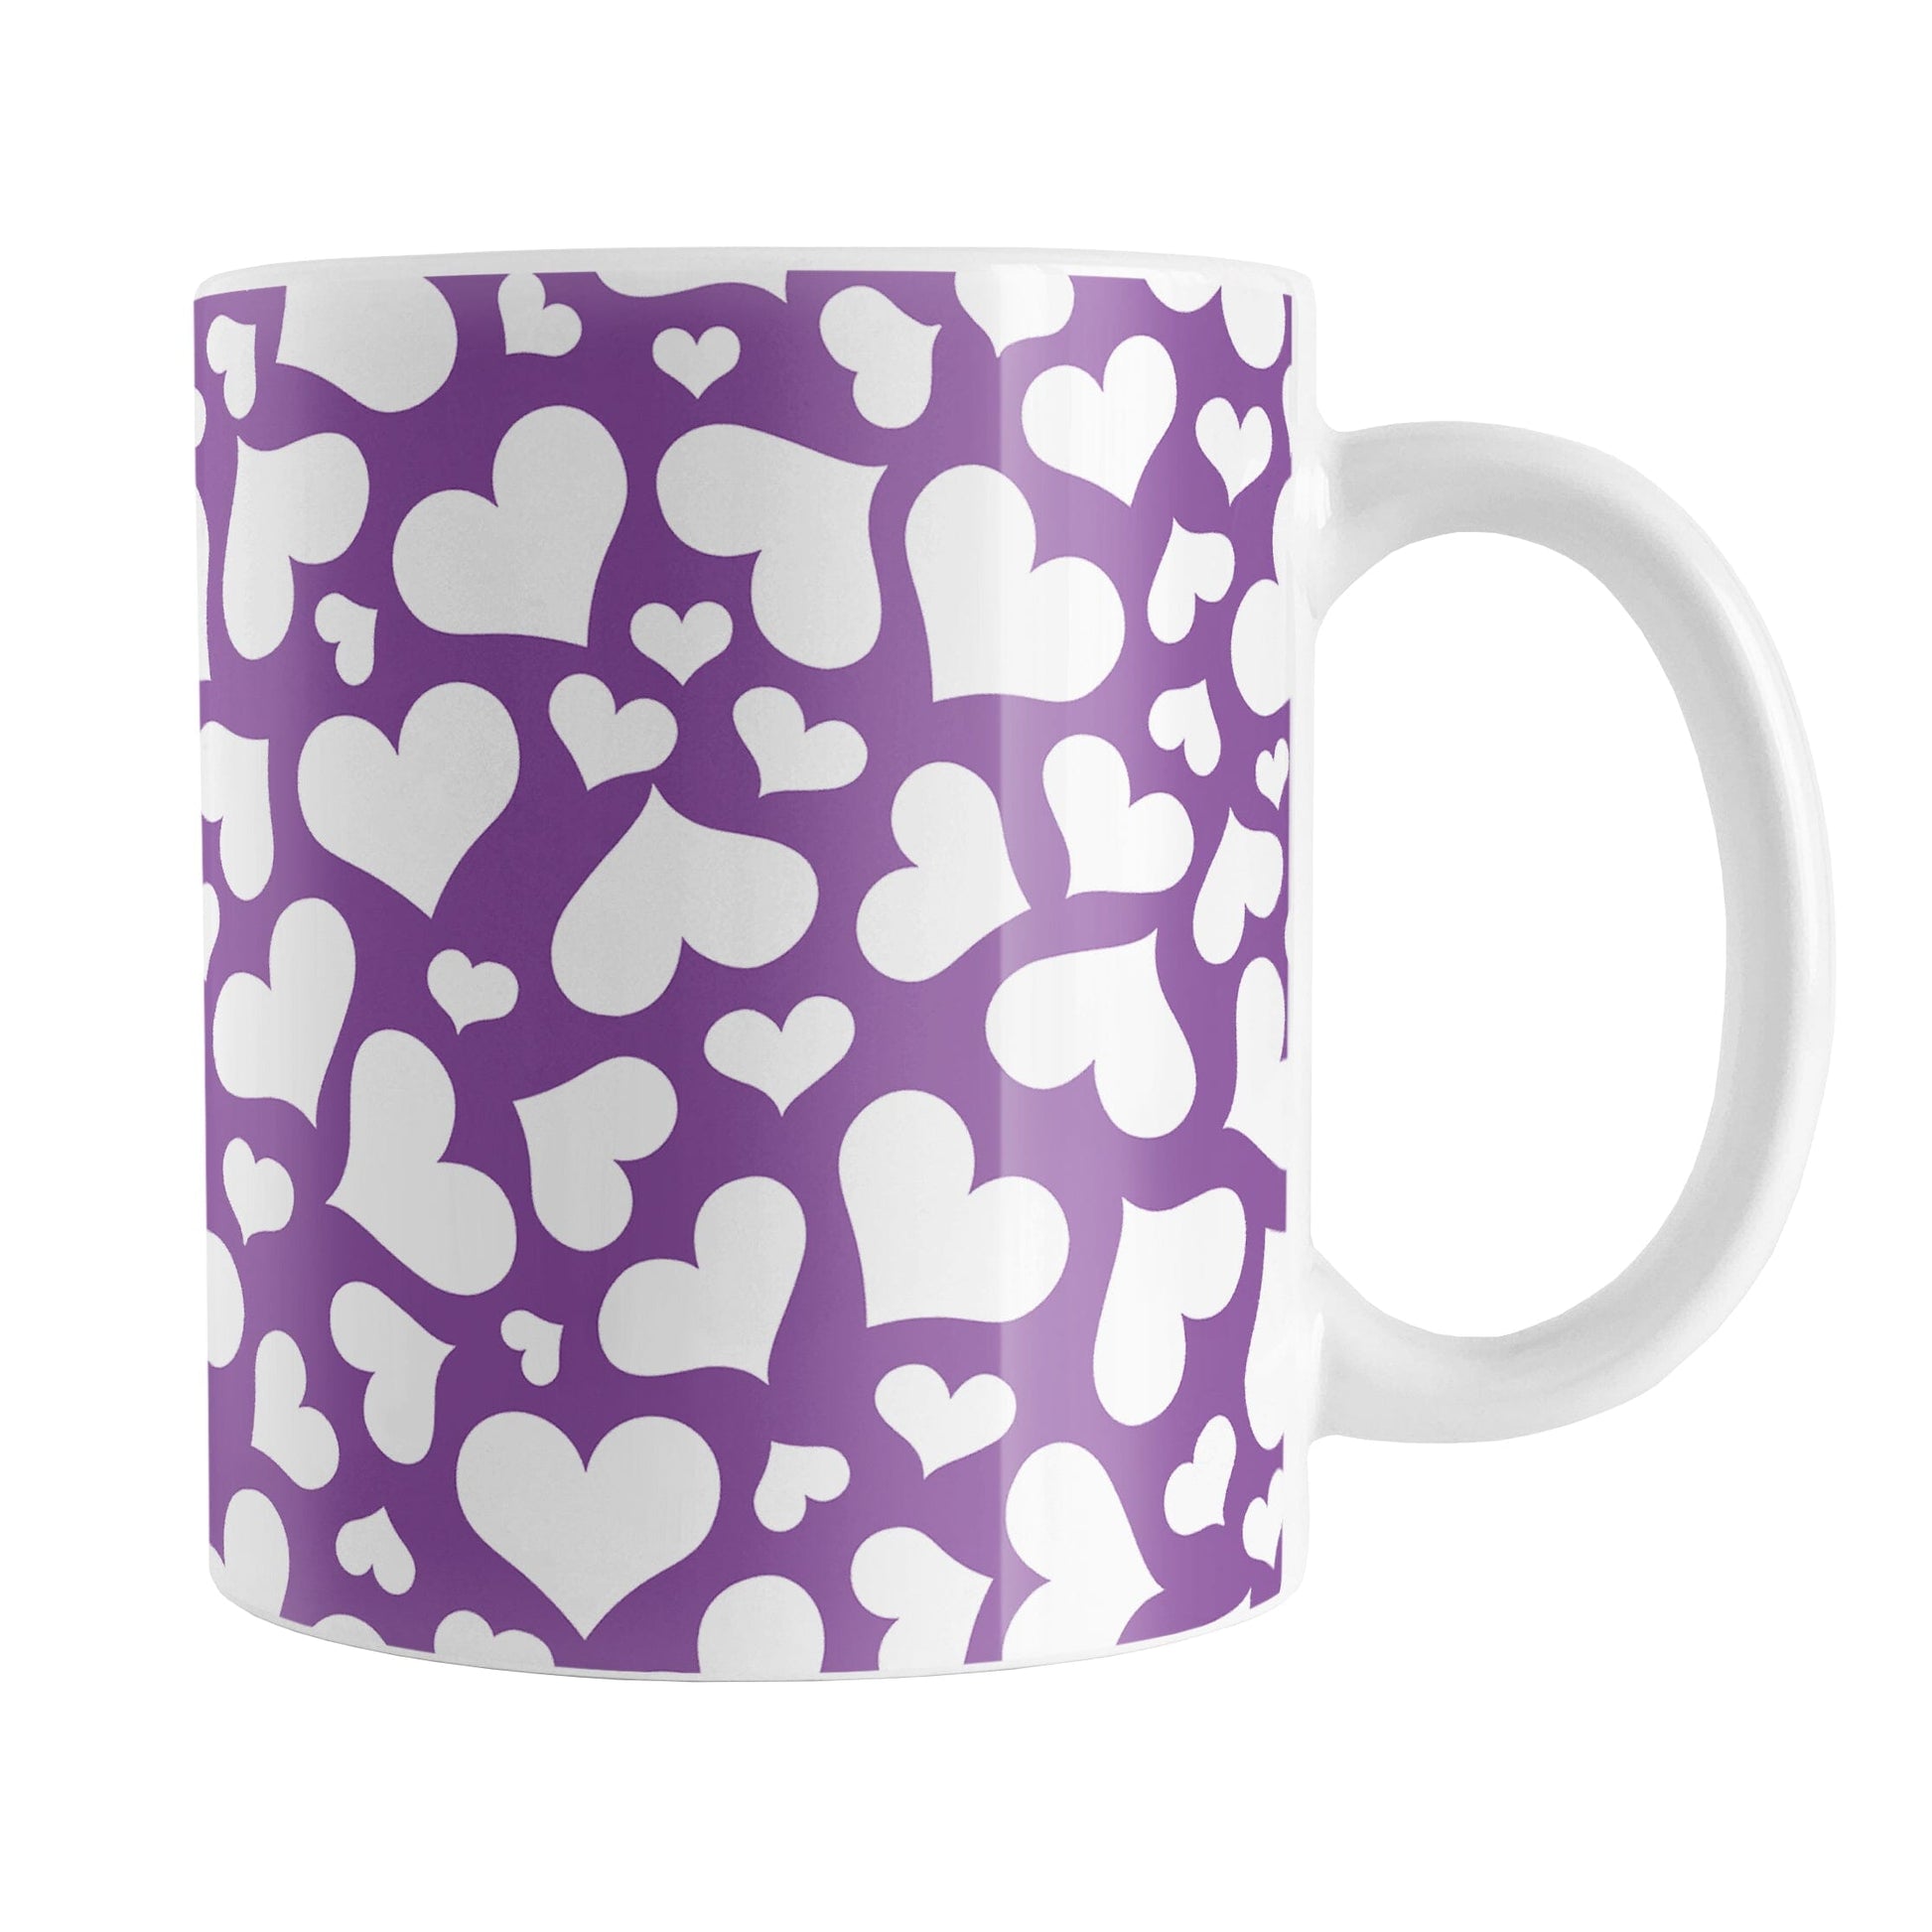 Cute White Hearts on Purple Mug (11oz) at Amy's Coffee Mugs. A ceramic coffee mug designed with a multi-directional pattern of cute white hearts over a purple background color that wraps around the mug to the handle.